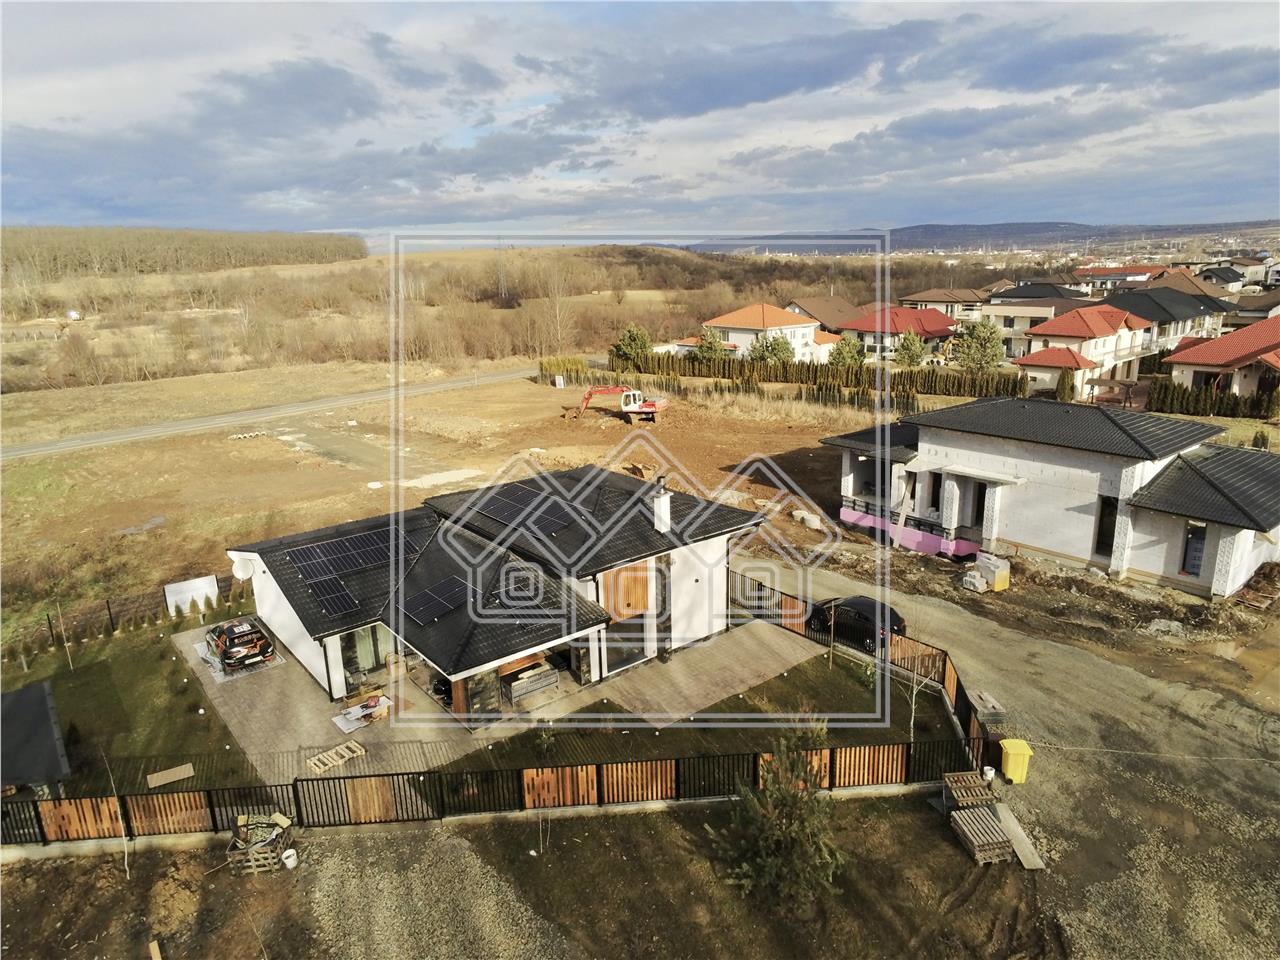 Residential complex of houses on one level - Selimbar - Sibiu Real Estate